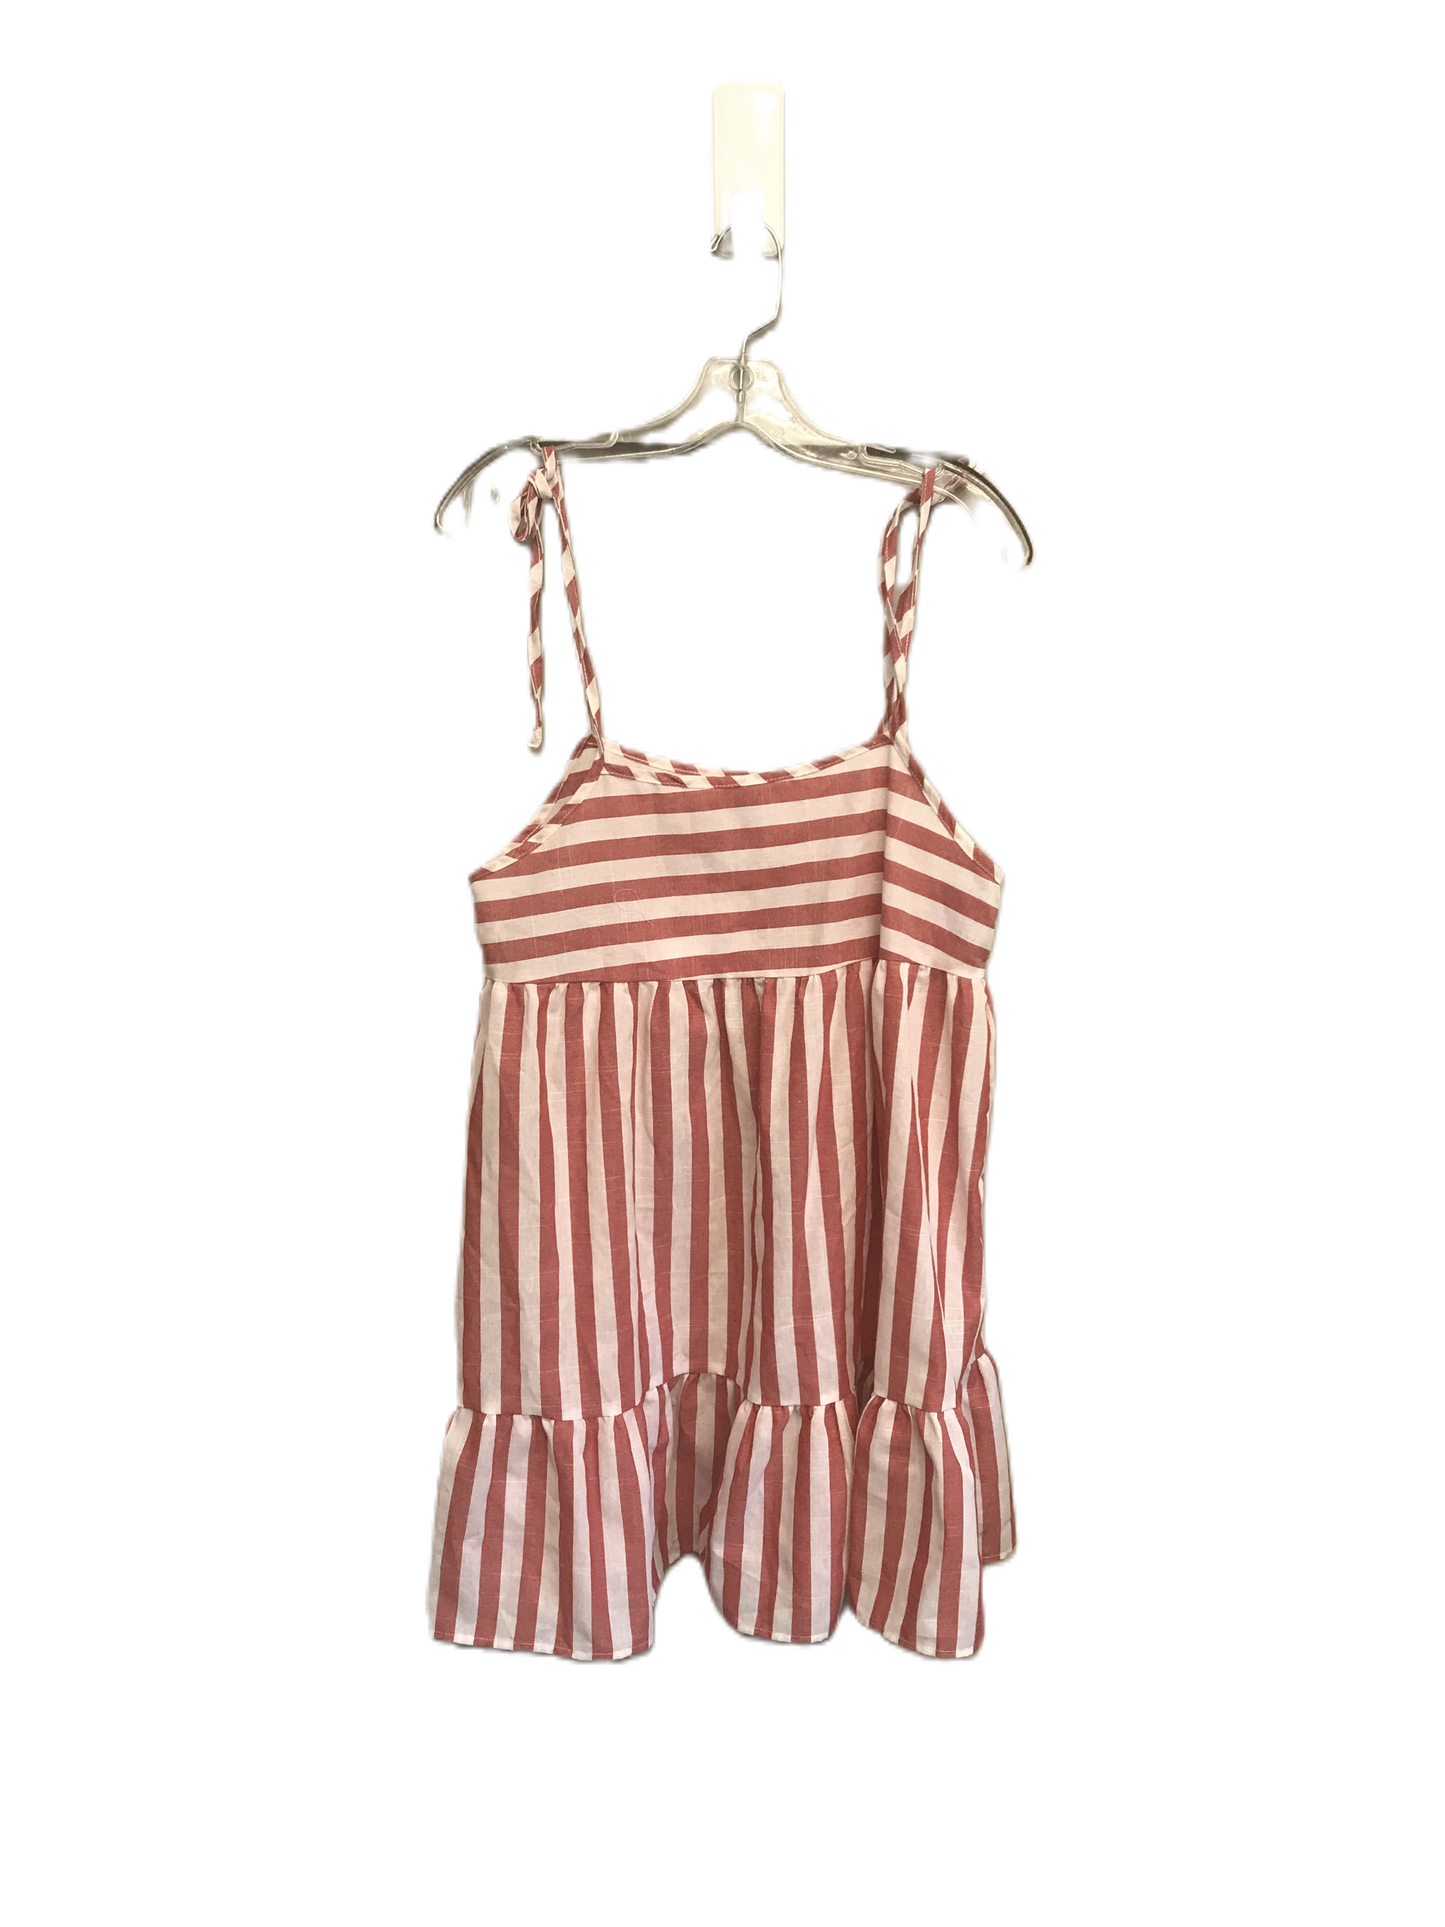 Striped Pattern Dress Casual Short By Shein, Size: M